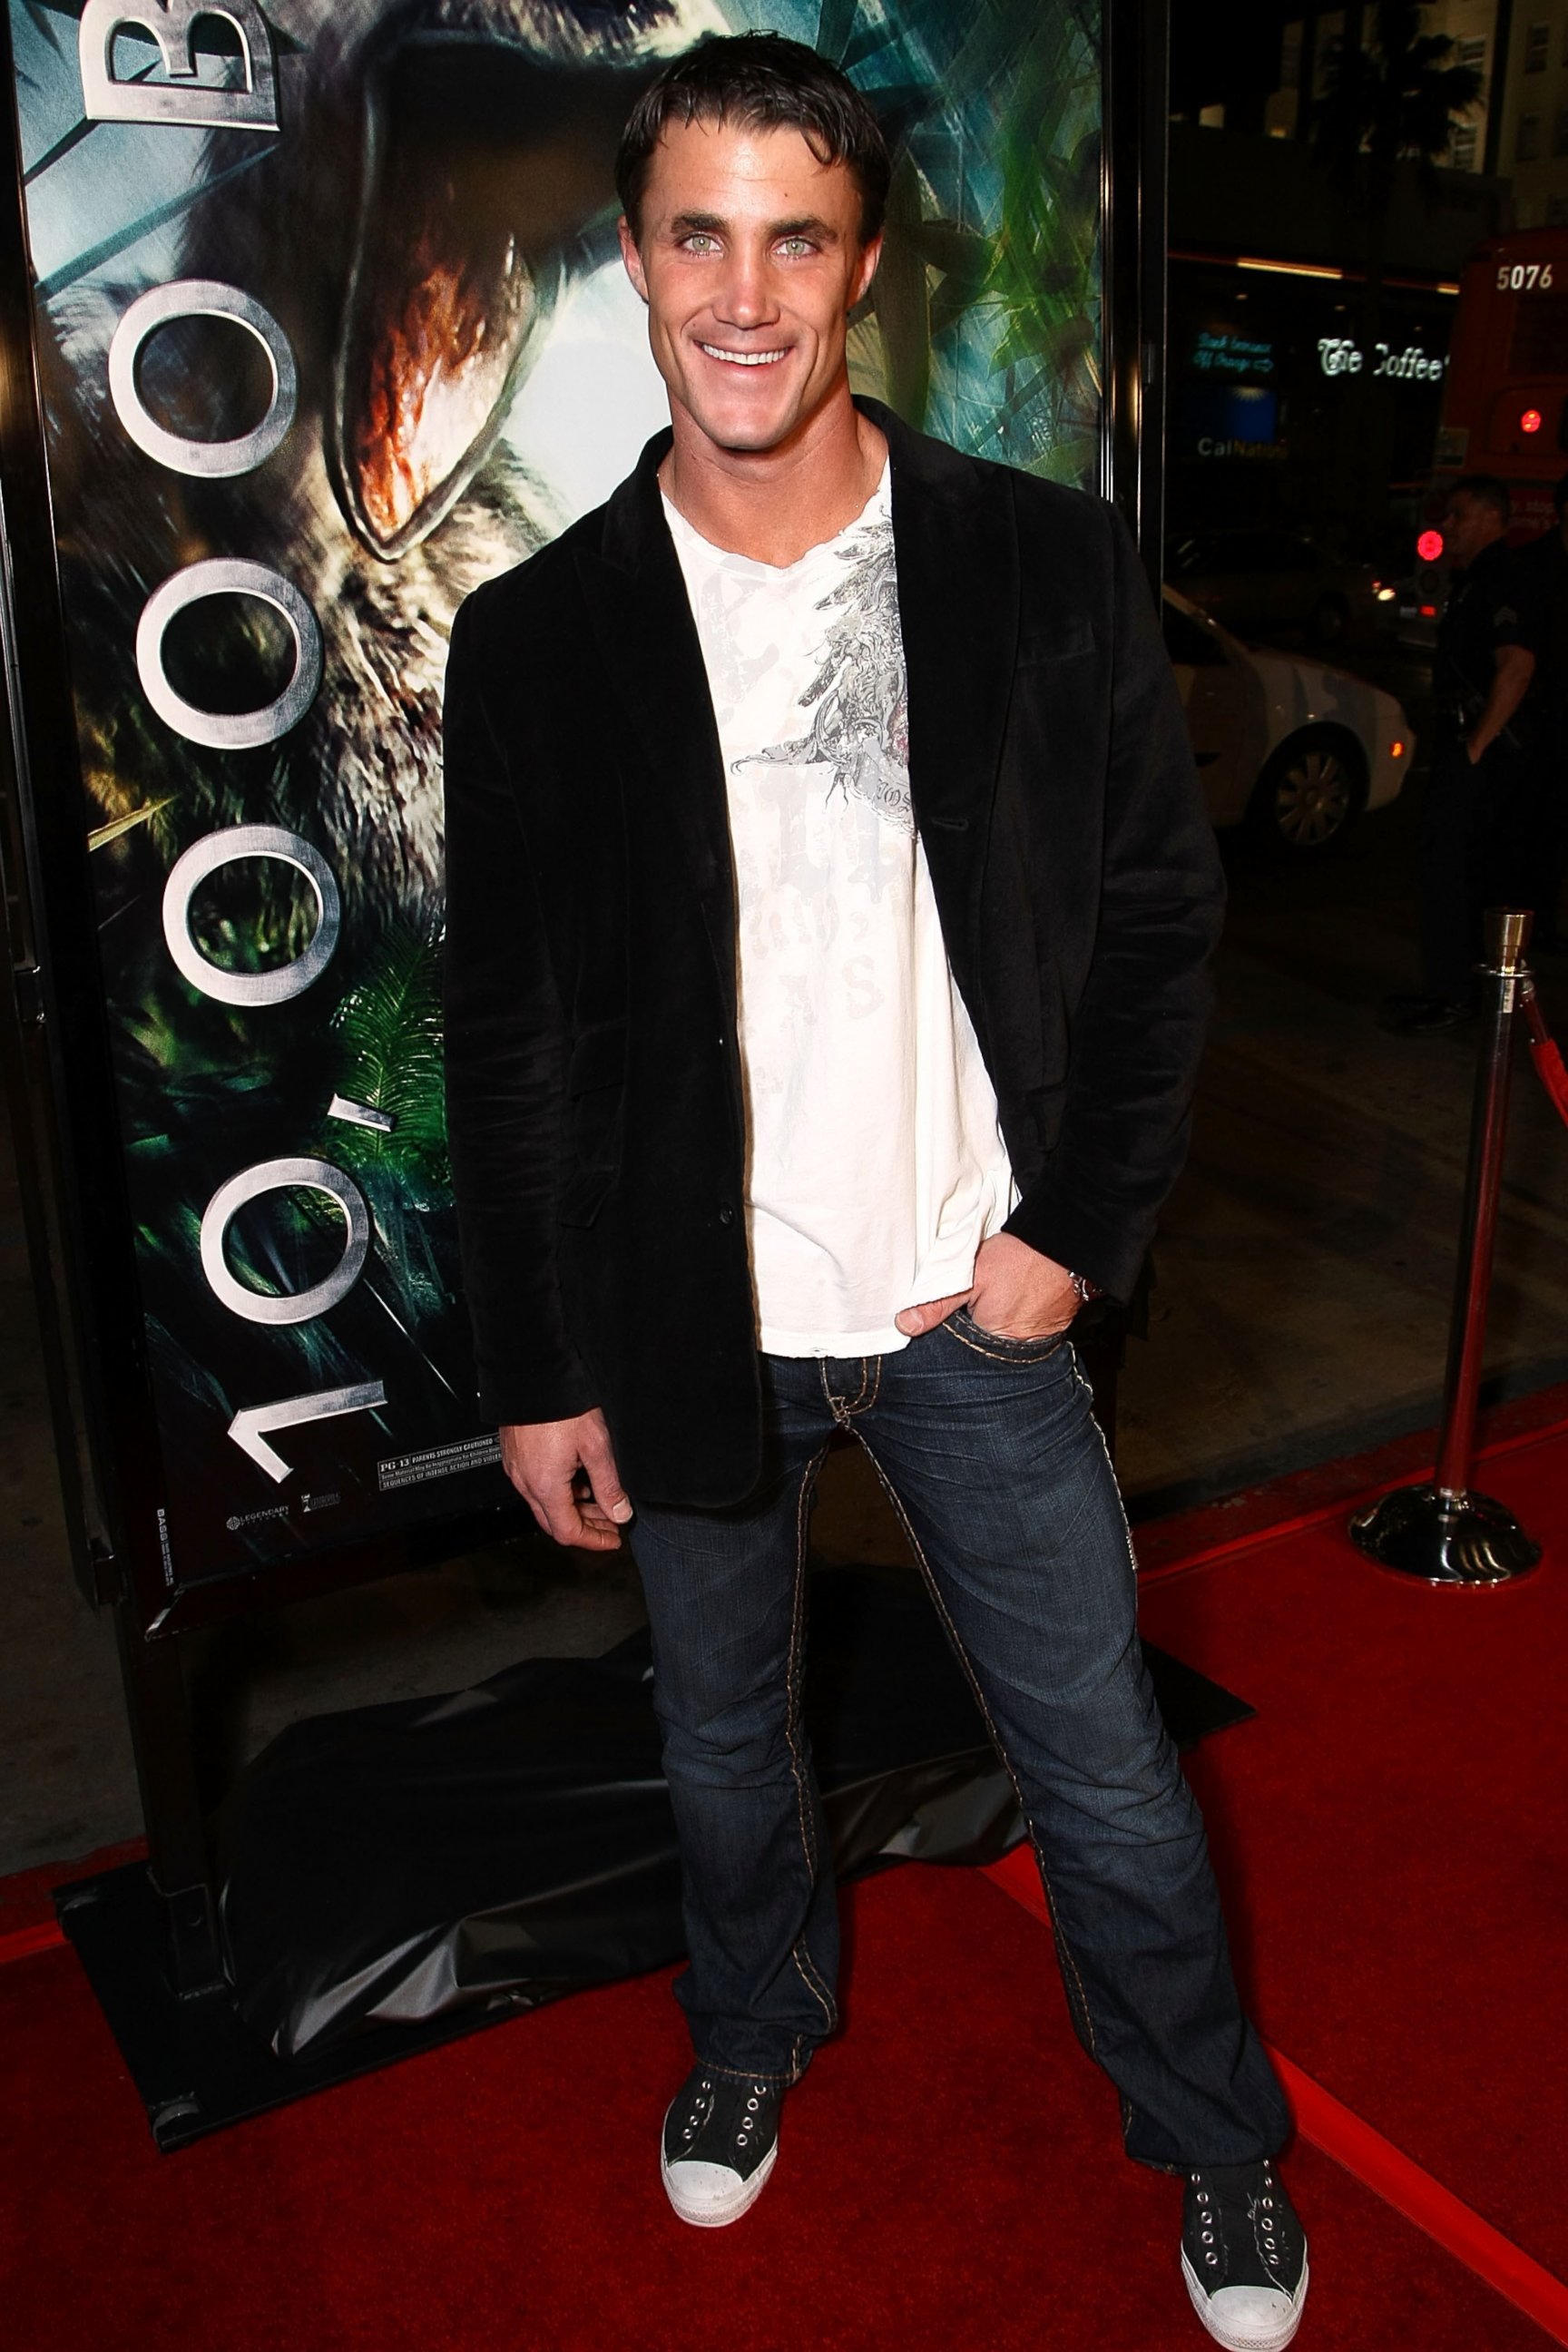 PHOTO: Actor Greg Plitt arrives at the premiere of Warner Bros. Pictures' "10,000 B.C." held at Mann's Chinese theater, March 5, 2008 in Hollywood, Calif.